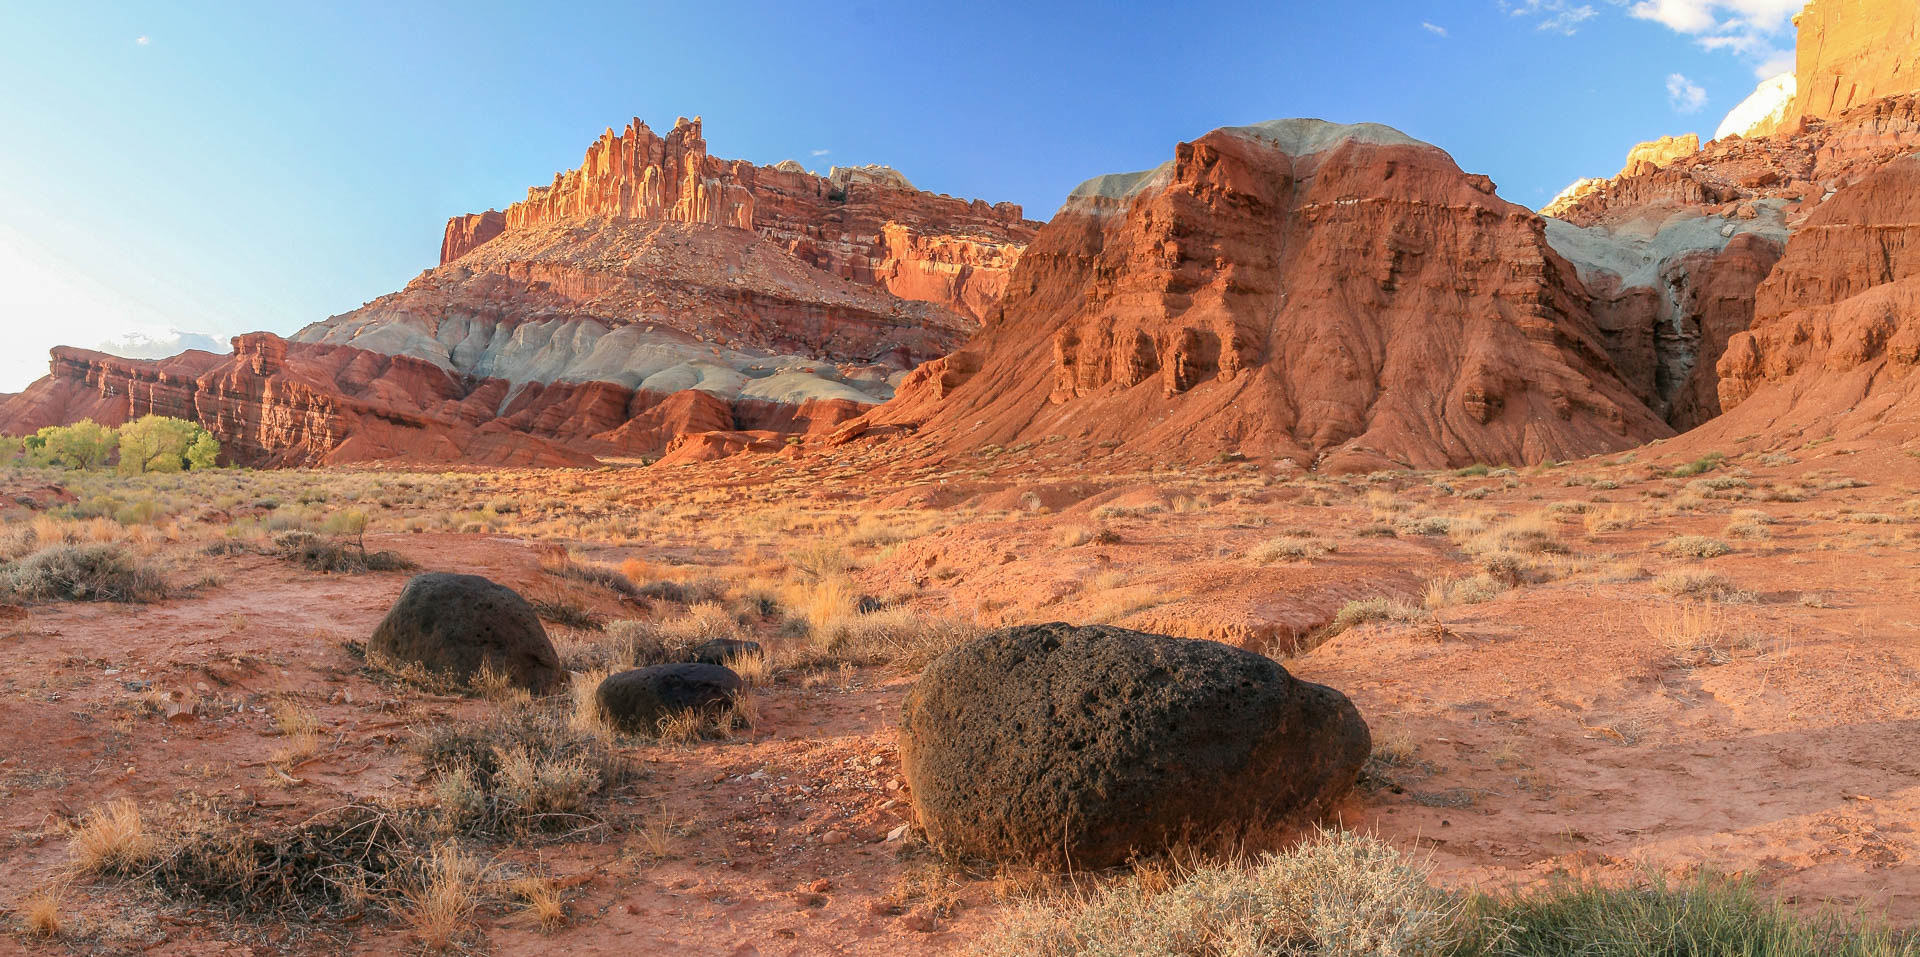 The Castle (Capitol Reef National Park)